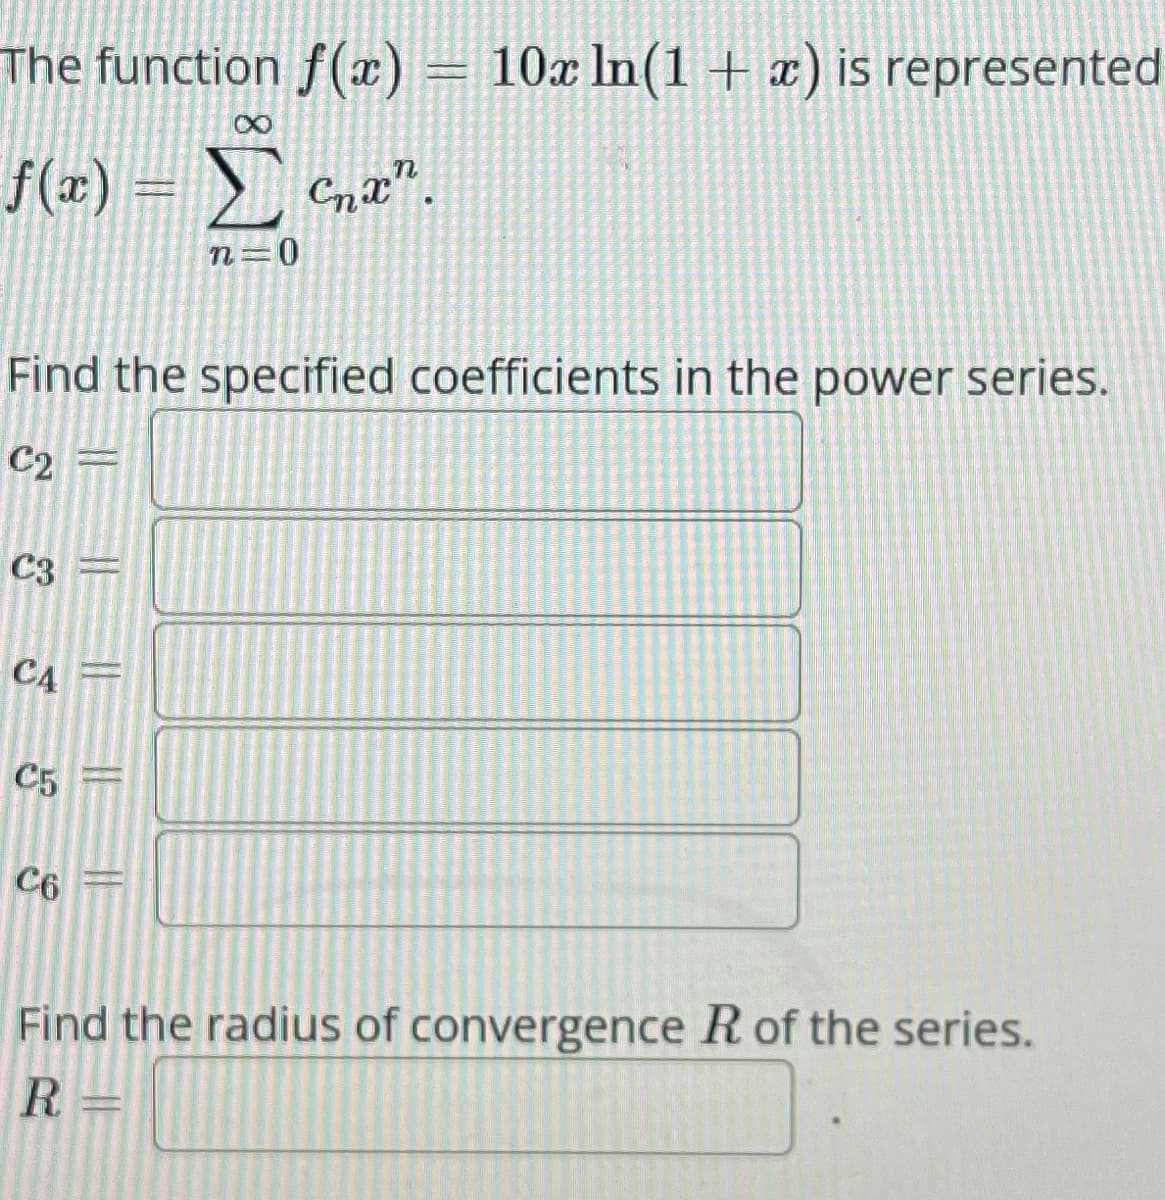 The function f(x) = 10x ln(1 + x) is represented
X
f(x) = Σ cna".
n=0
Find the specified coefficients in the power series.
C2 =
C3 =
C4 =
C5
C6
Find the radius of convergence R of the series.
R =